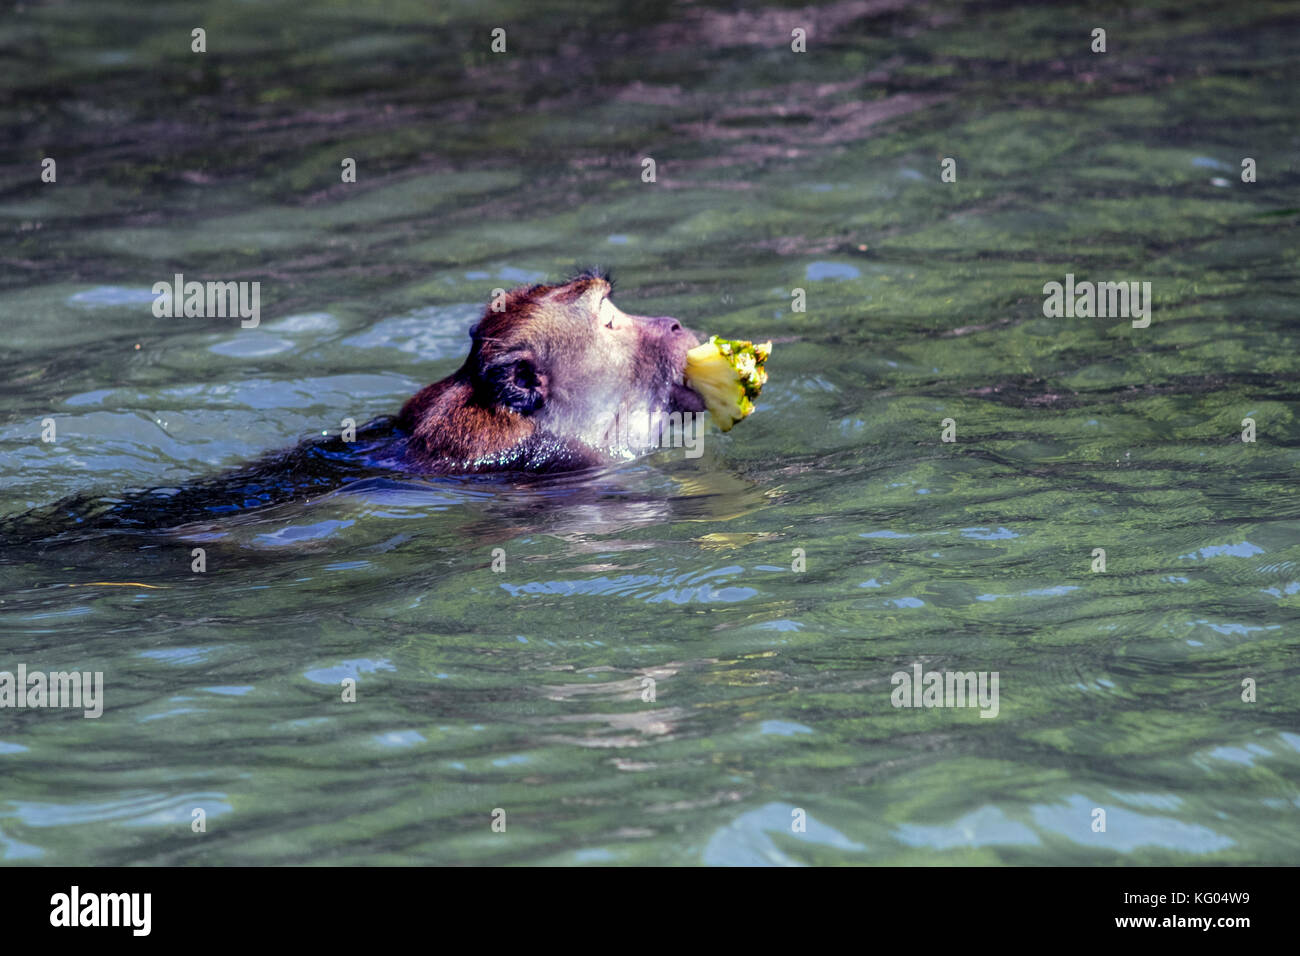 Asia. Thailand. Koh Lanta island. Monkey retrieving a piece of pineapple launched by tourists. Stock Photo